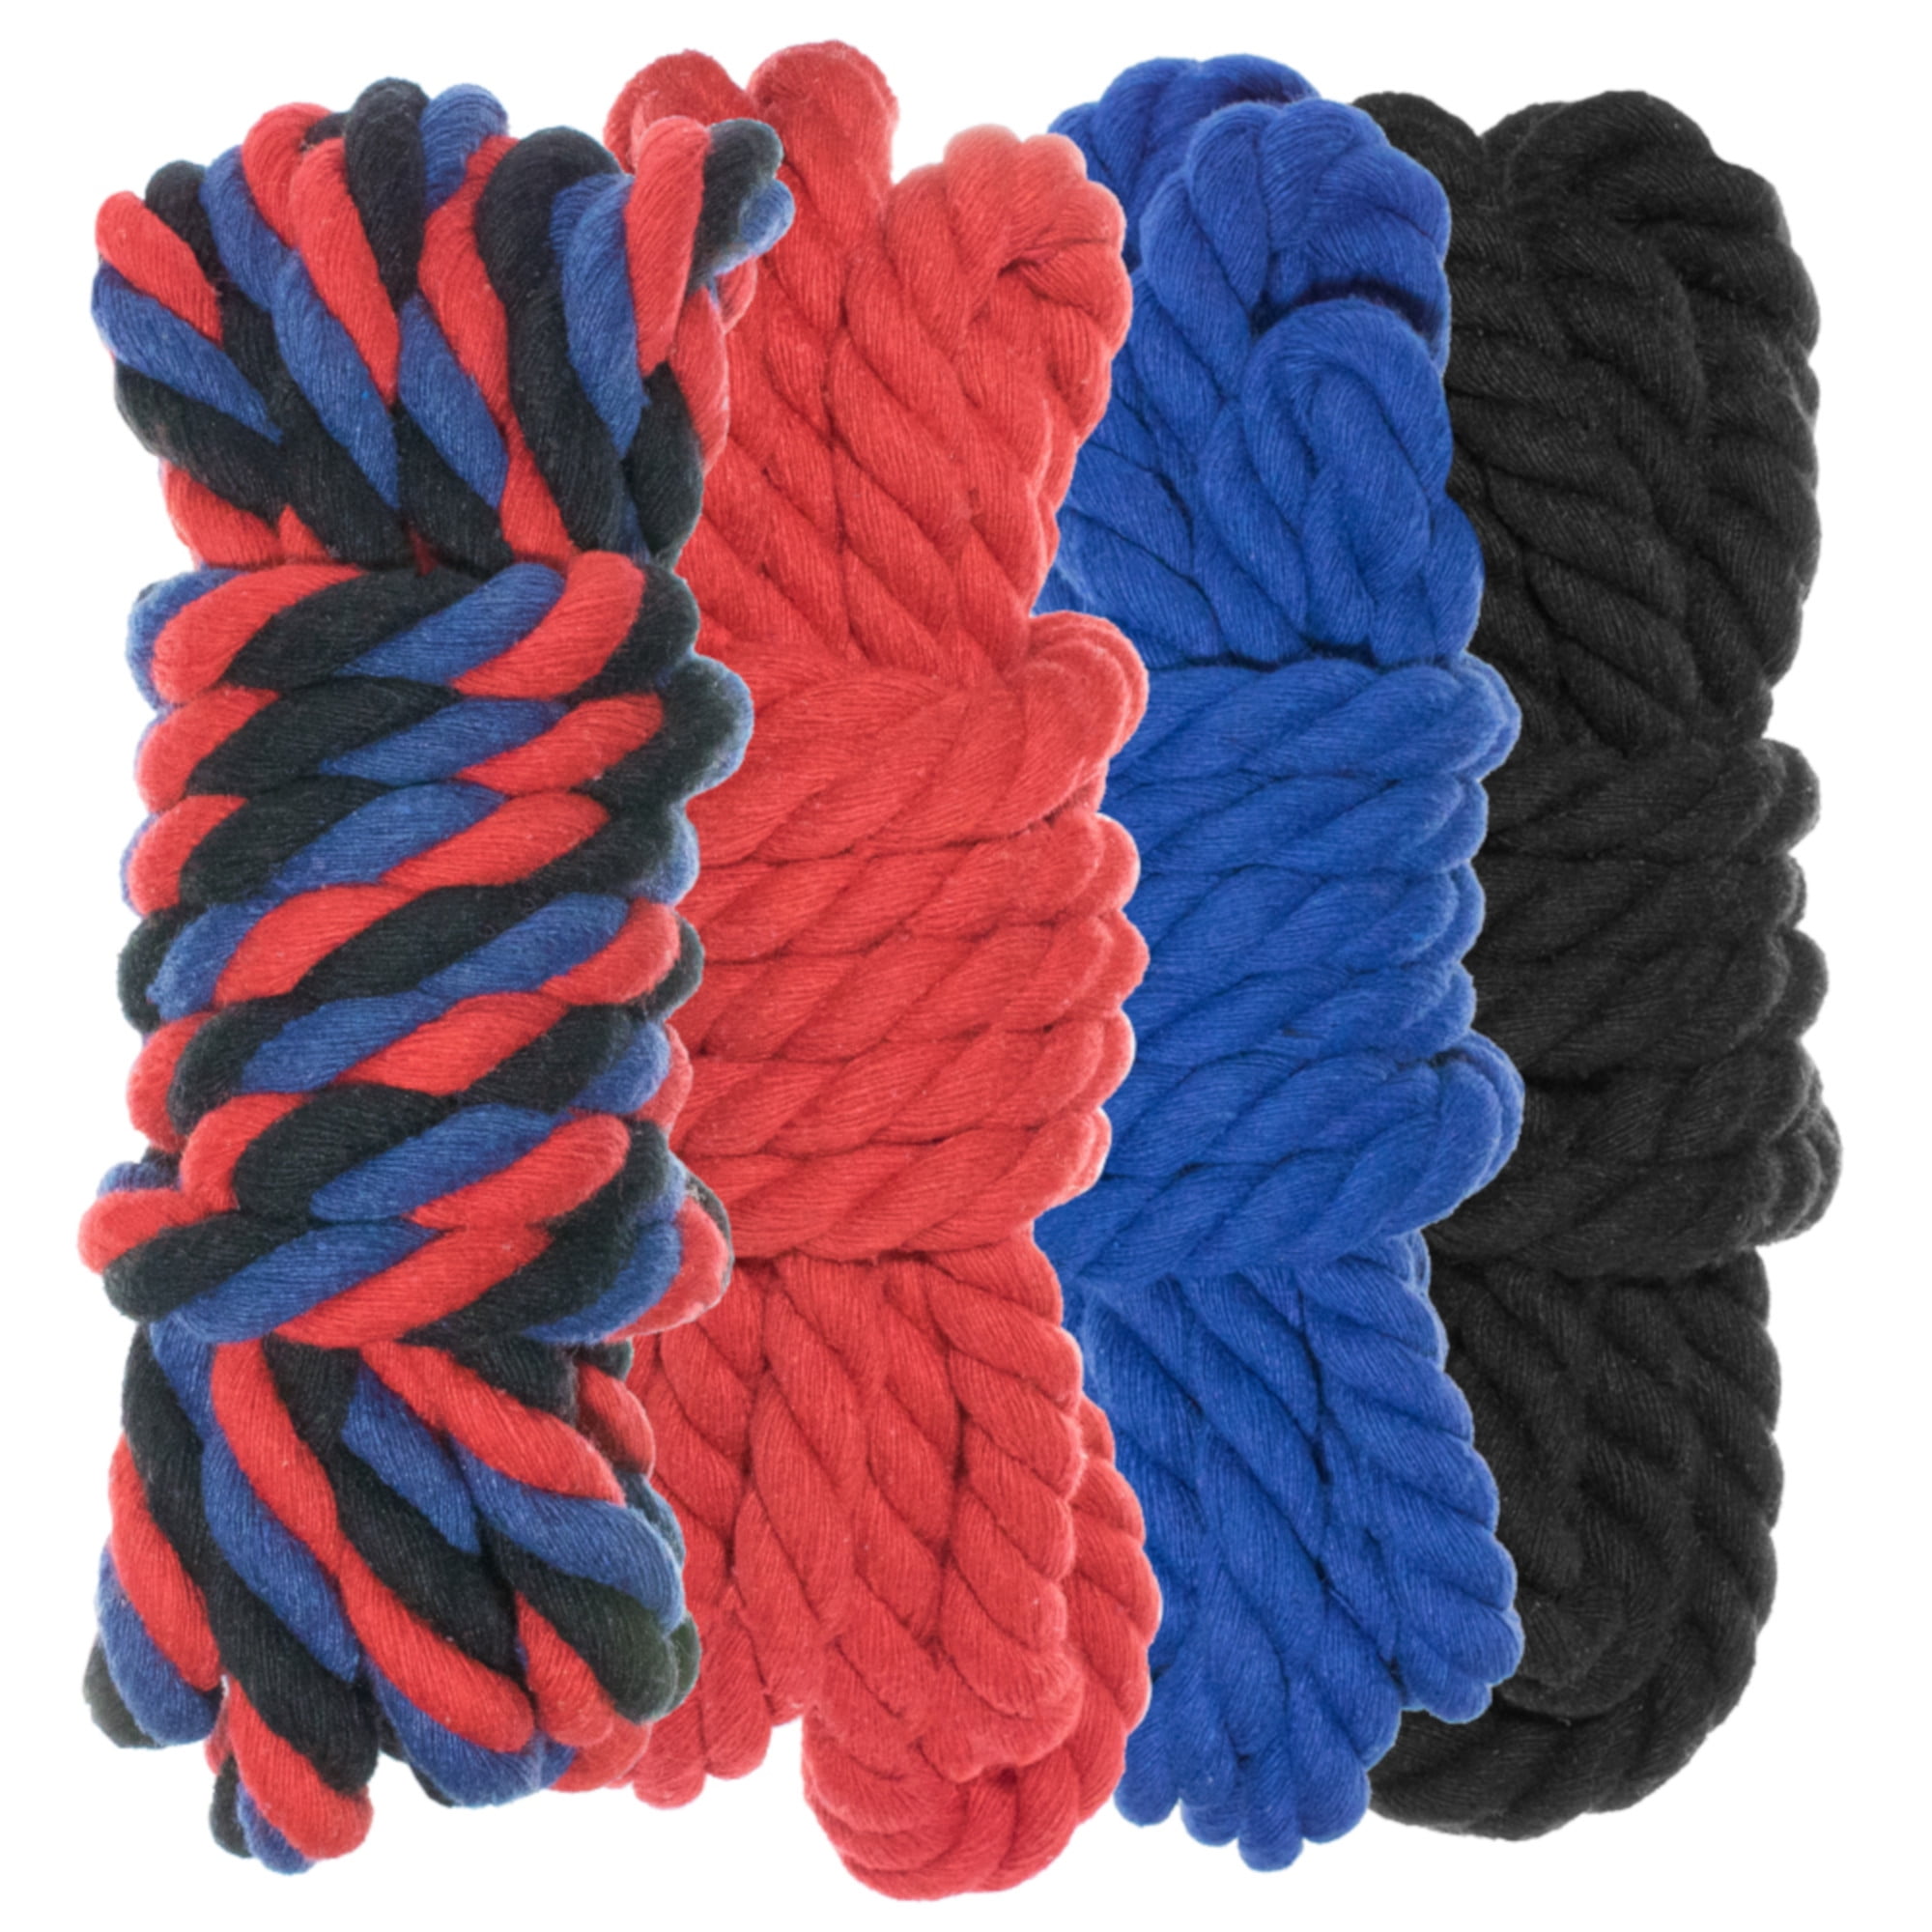  KEDMOT Colorful 7mm Round Soft 3 Strands Twisted Rope Cotton  Rope for for Twisted Shoe Laces Home Decoration DIY Crafting : Clothing,  Shoes & Jewelry